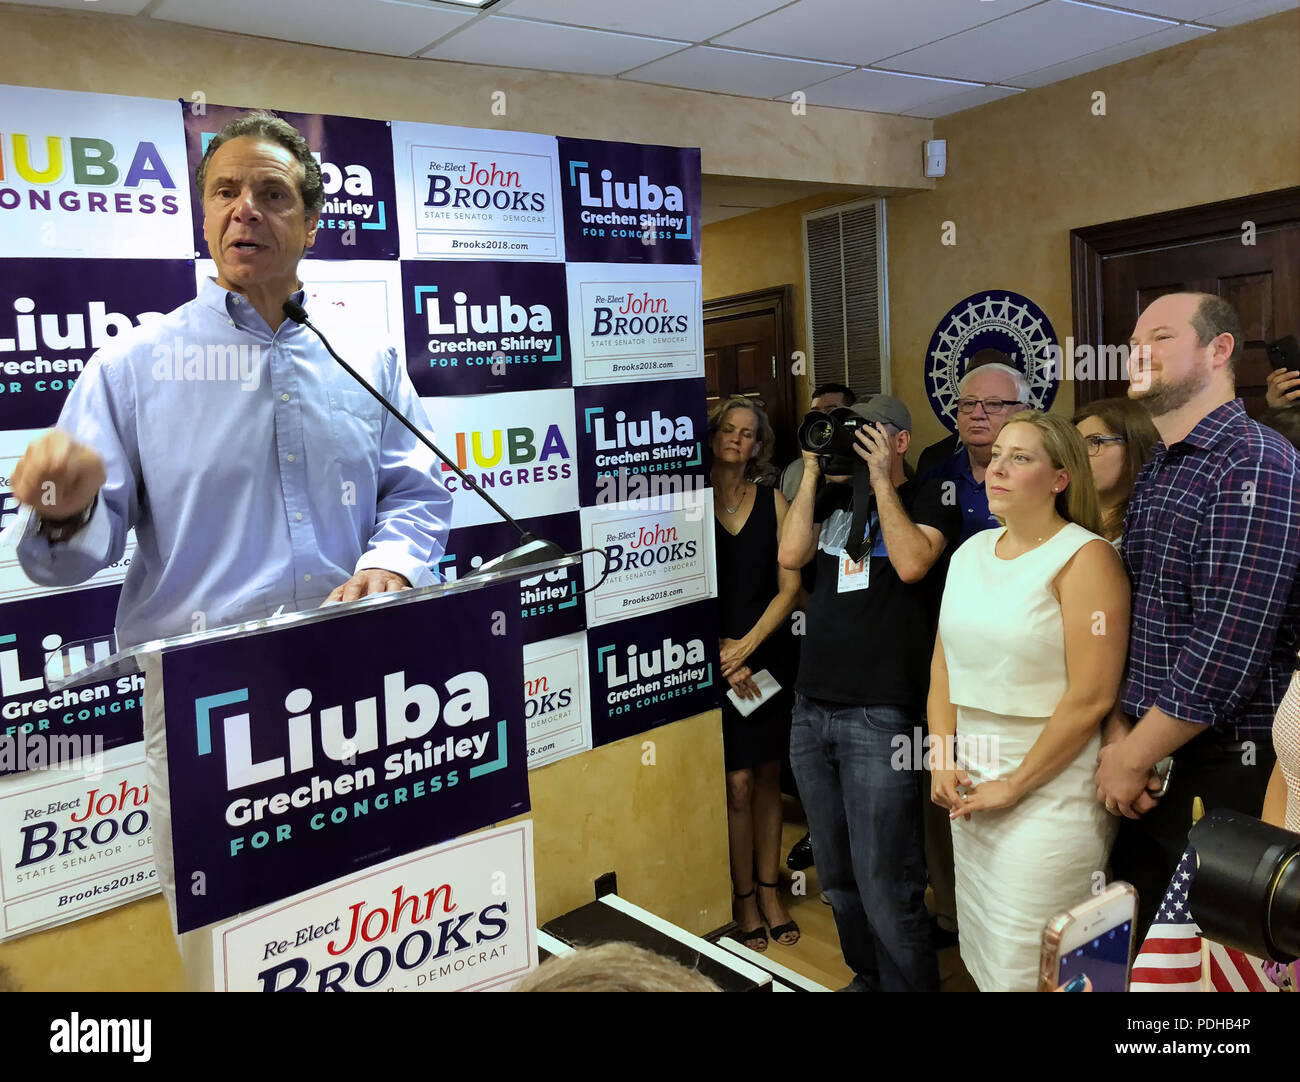 Massapequa, New York, USA. 5th Aug, 2018. Governor ANDREW CUOMO speaks at podium, as (by cirucular wall sign) NY Senator JOHN BROOKS; LIUBA GRECHEN SHIRLEY, Congressional candidate for NY 2nd District; and her husband CHRIS SHIRLEY, at extreme right; and others listen at opening of joint campaign office, aiming for a Democratic Blue Wave in November midterm elections. Credit: Ann Parry/ZUMA Wire/Alamy Live News Stock Photo